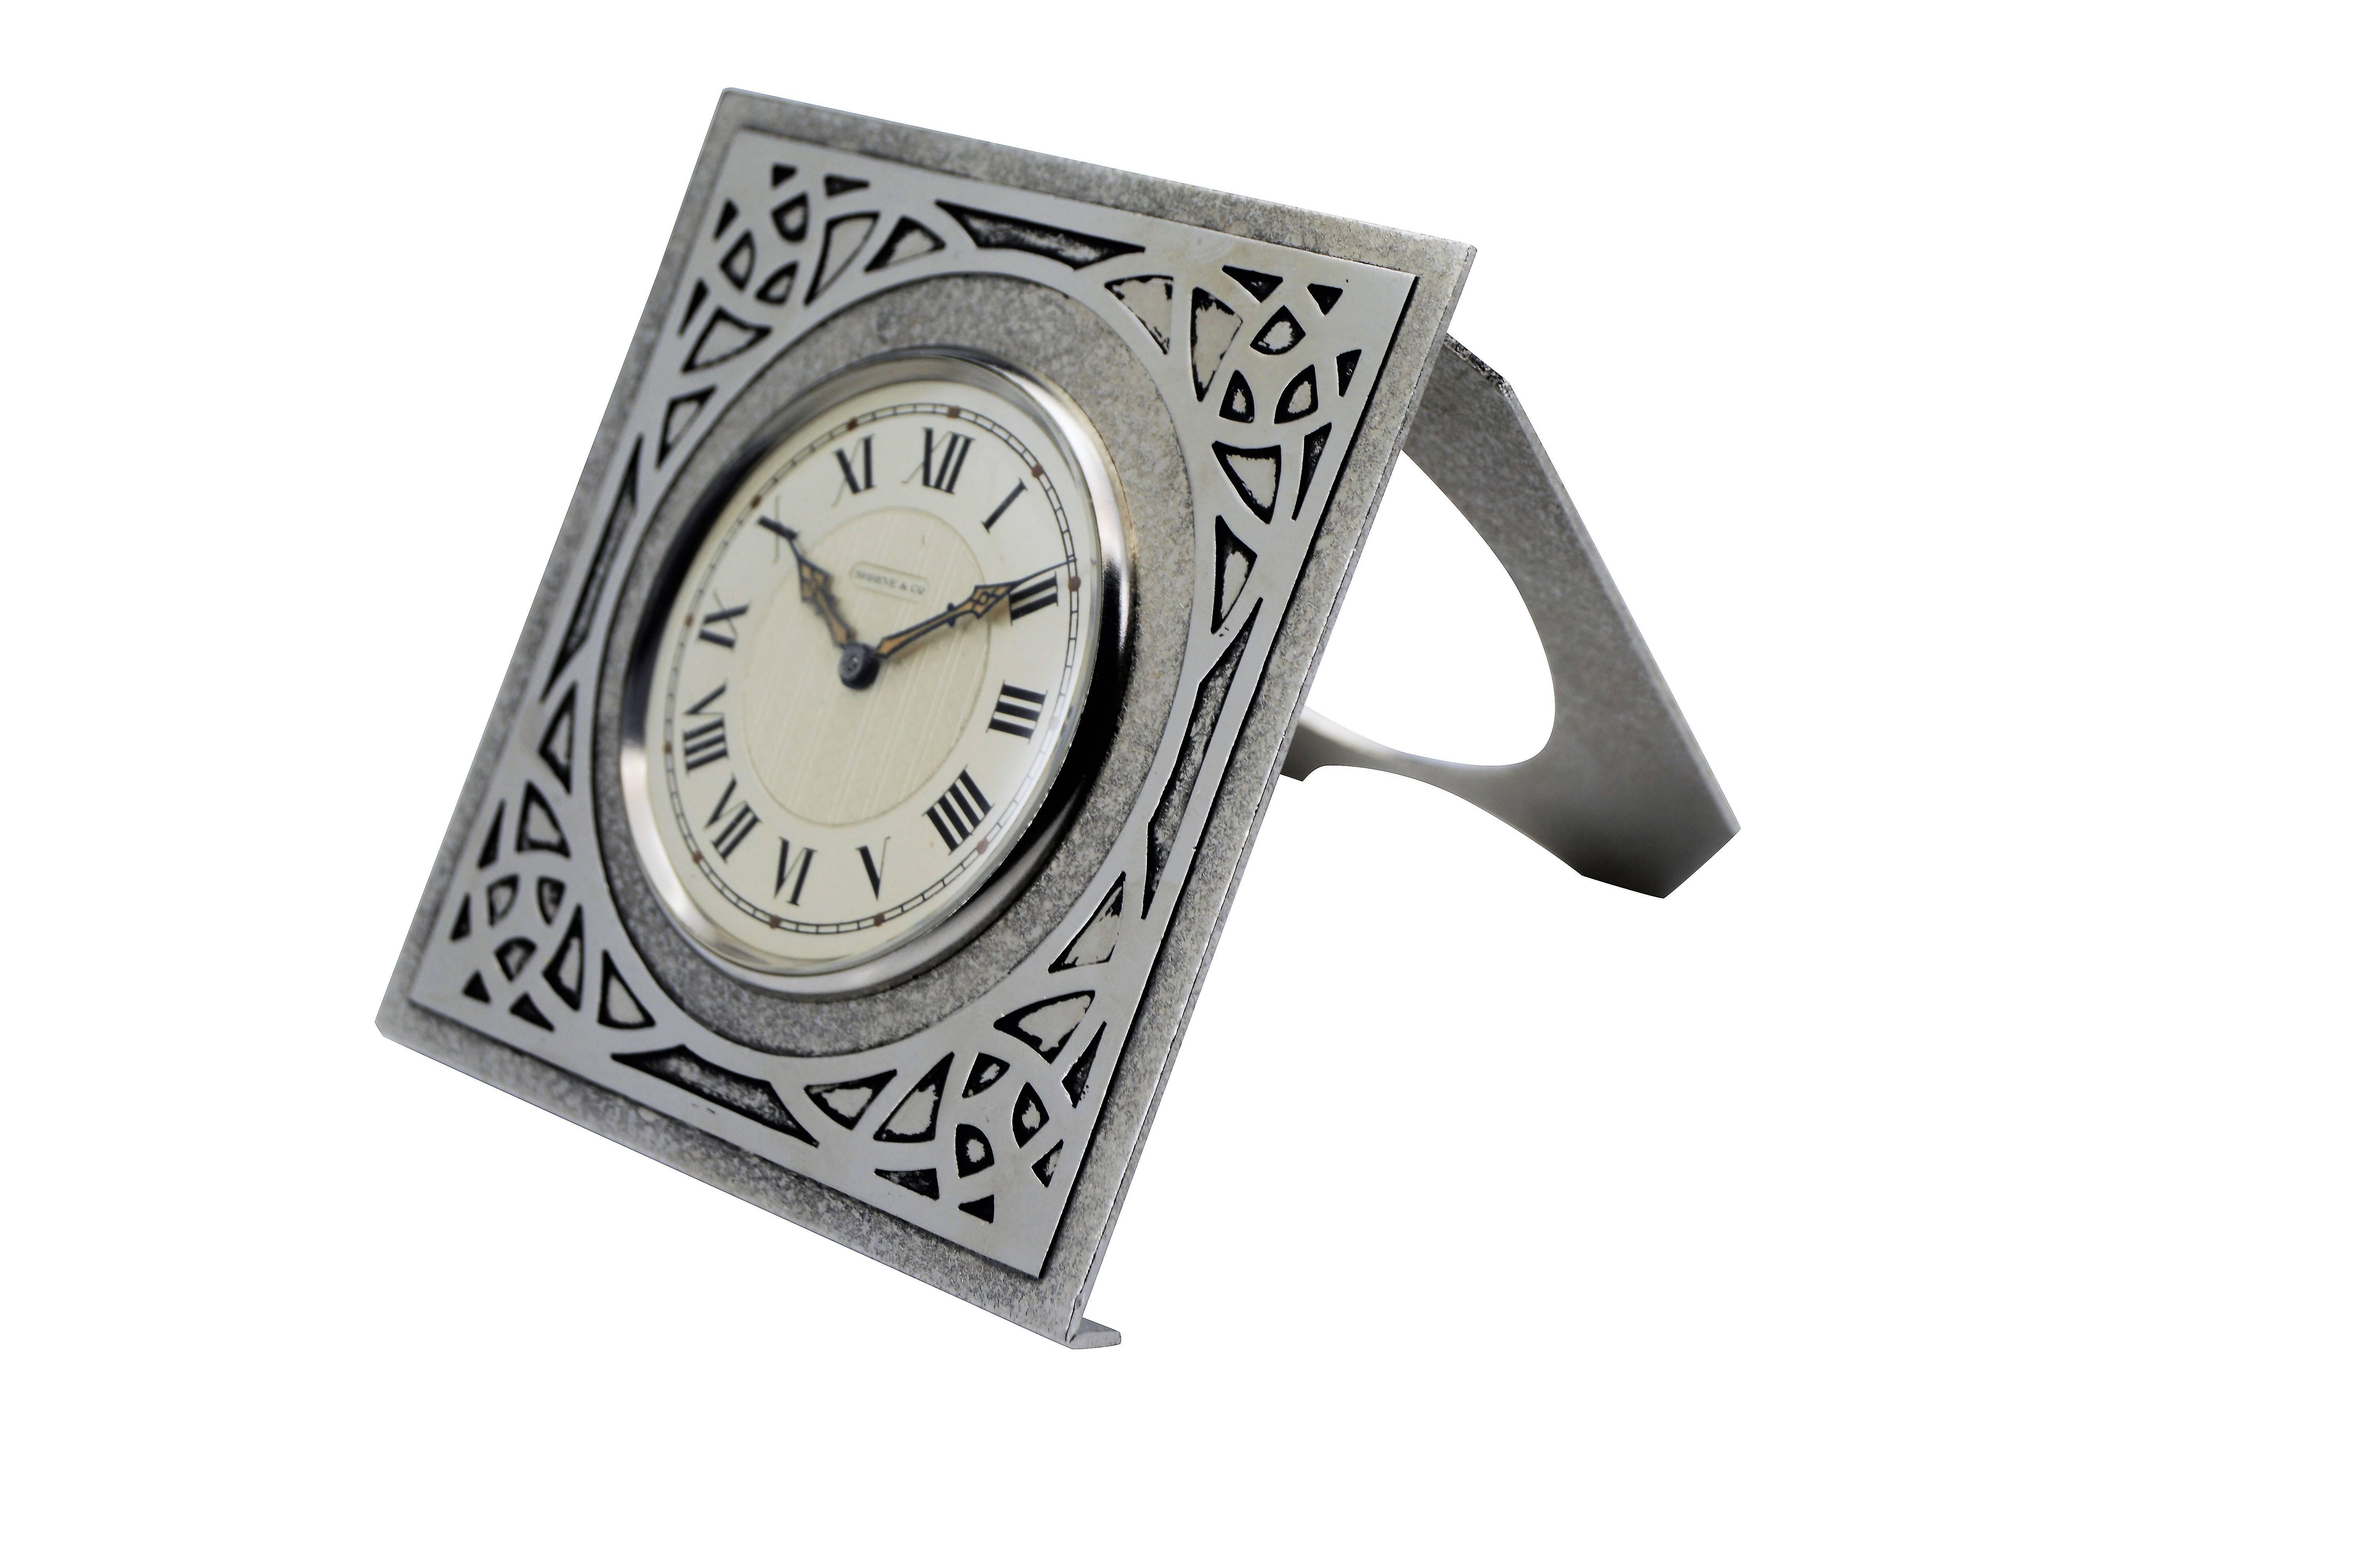 FACTORY / HOUSE: Shreve & Co.
STYLE / REFERENCE: Arts and Crafts Desk Clock
METAL / MATERIAL:
CIRCA / YEAR:
DIMENSIONS: Length 4 Inches X Width 4 Inches
MOVEMENT / CALIBER: 8 Day
DIAL / HANDS: Silvered with Blued Steel Luminous Hands
WARRANTY: 18